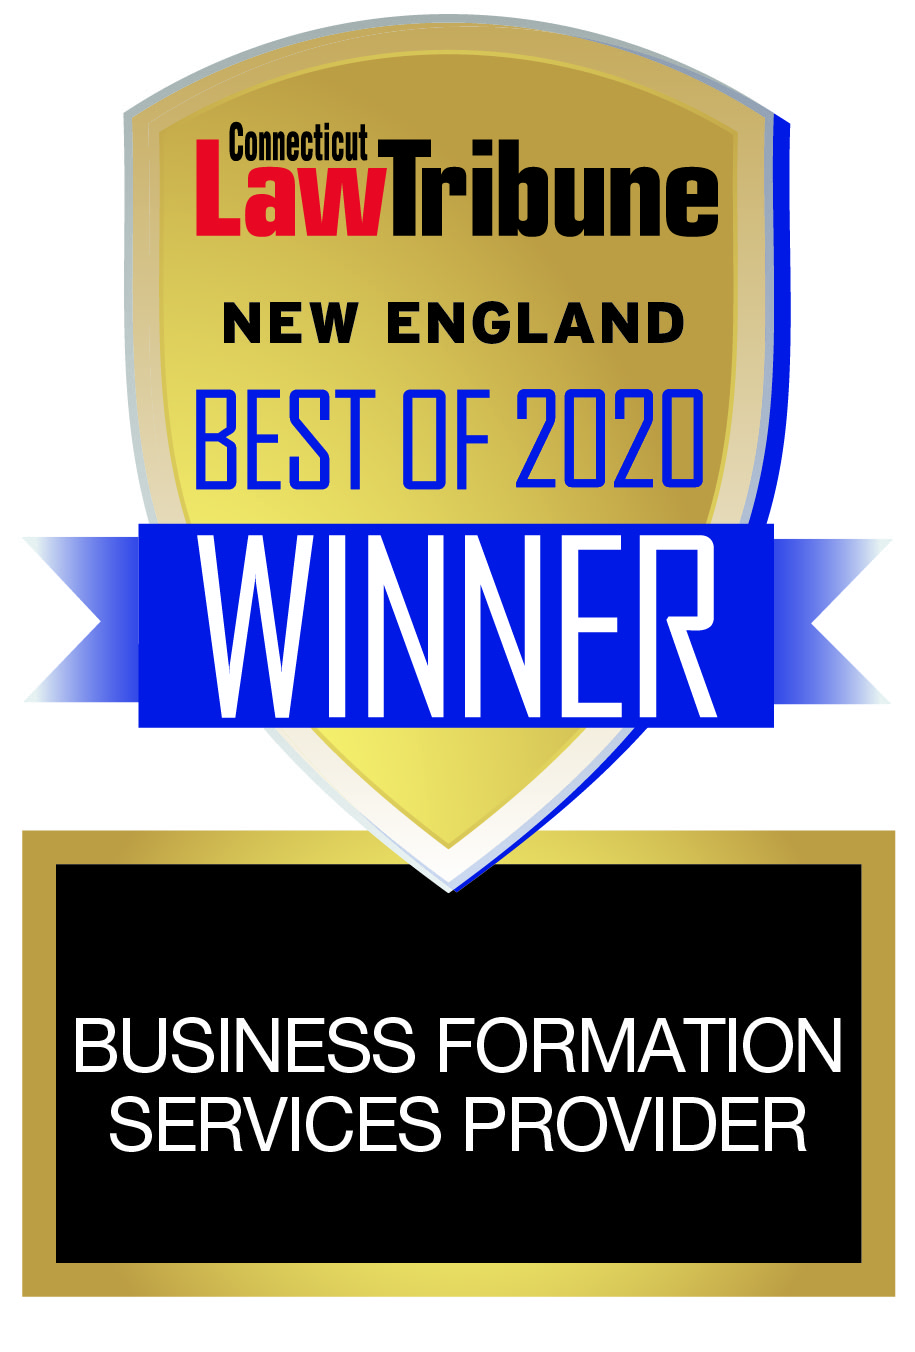 CSC voted as having the Best Business Formation Services by readers of the Connecticut Law Tribune